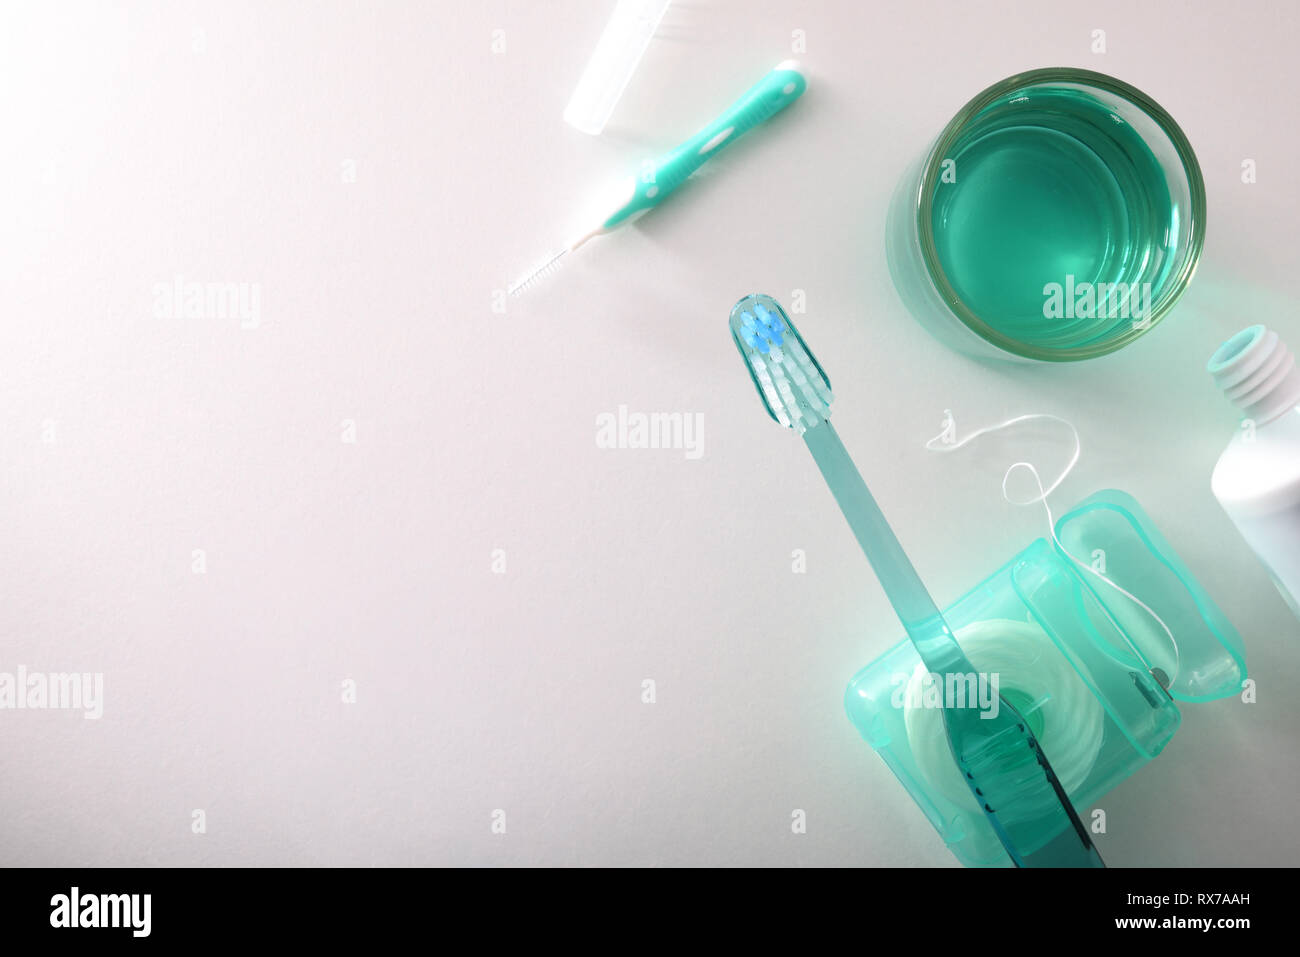 Personal products and tools for cleaning the mouth. Horizontal composition. Top view. Stock Photo